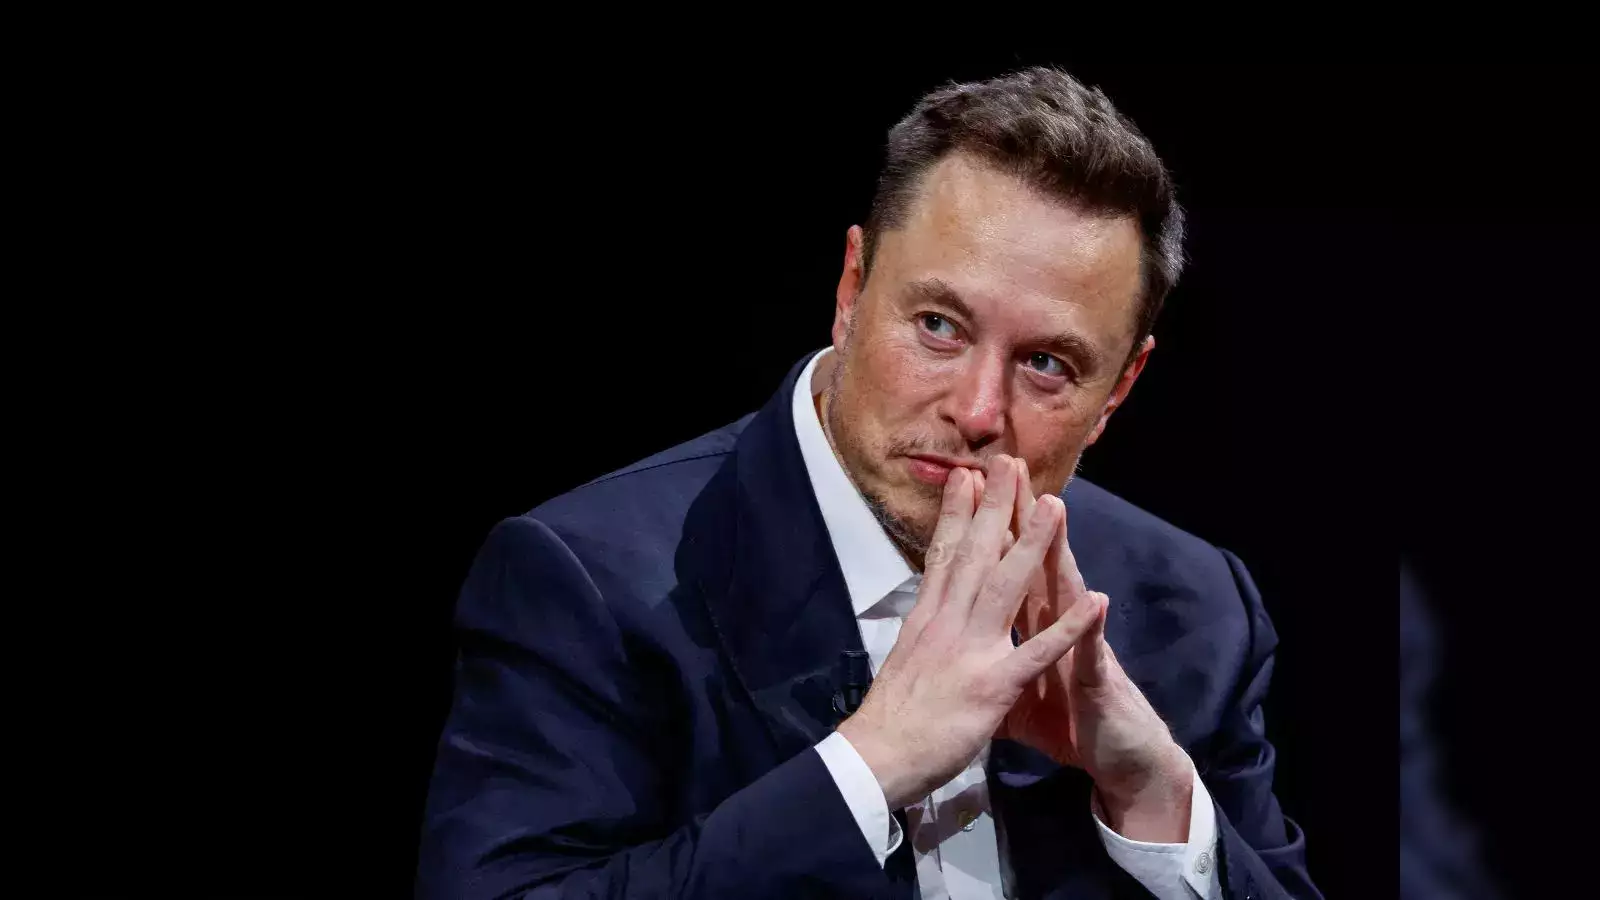 NYC's Top Money Manager Challenges Elon Musk’s Mega Pay Amid Calls for Better Oversight